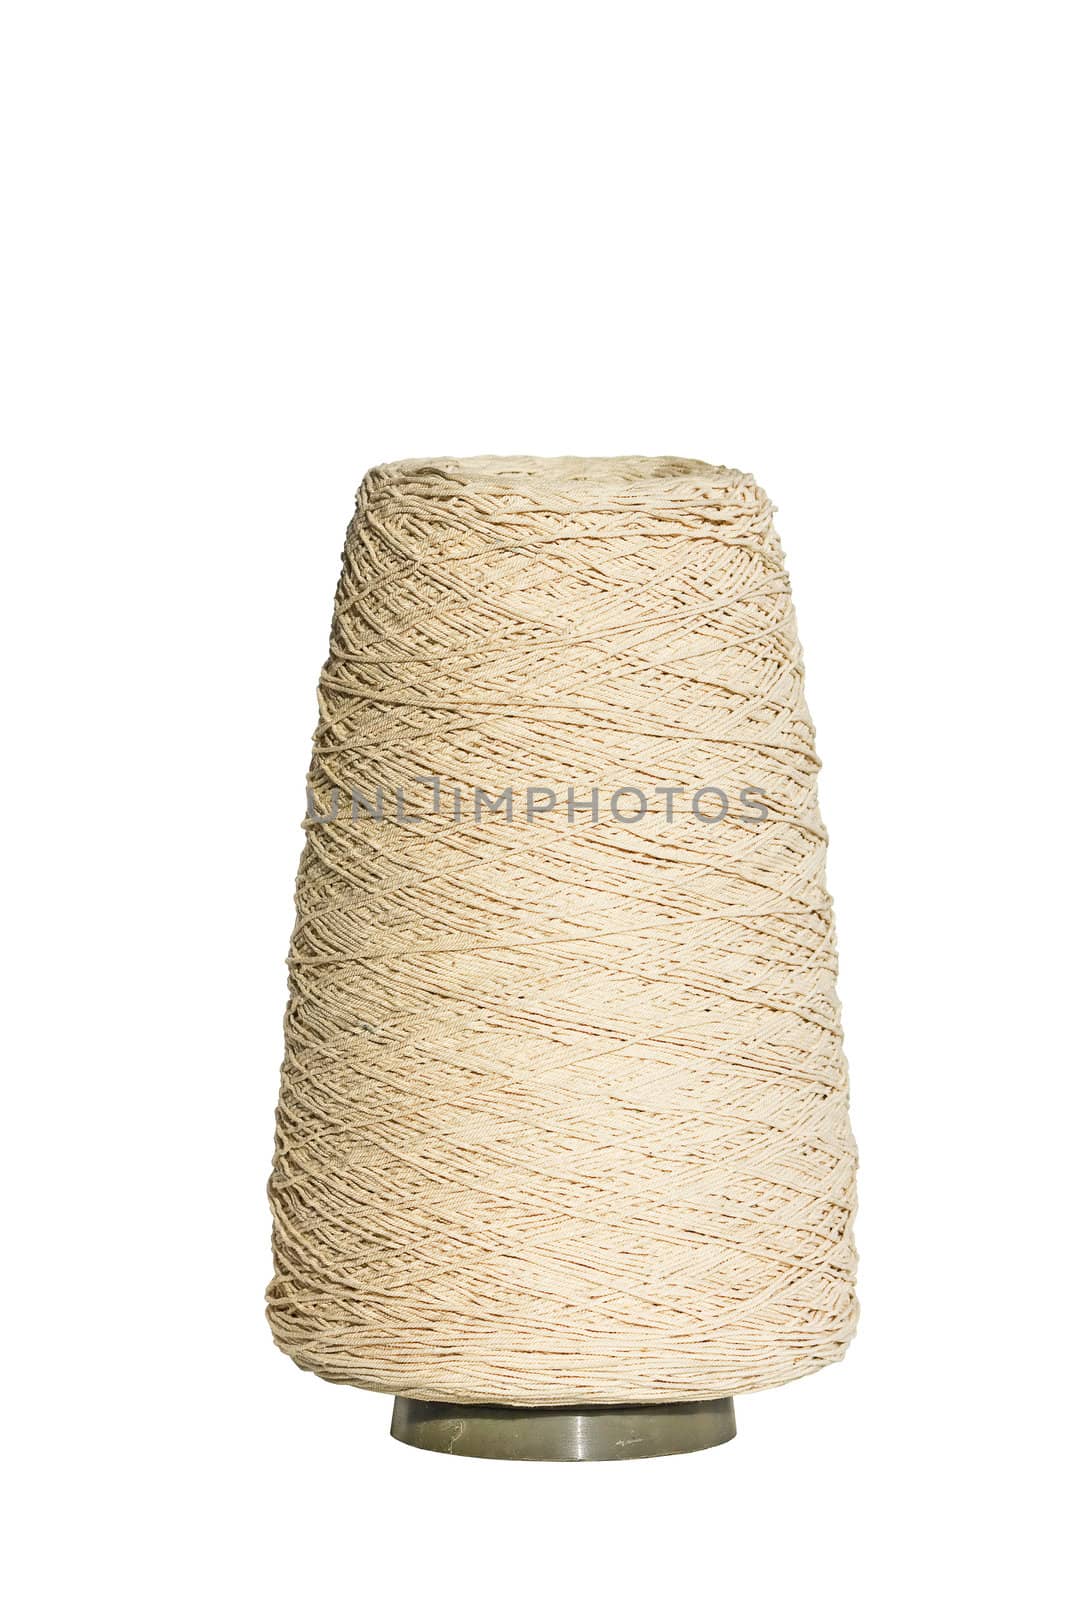 Reel of thread, isolated on a white background.